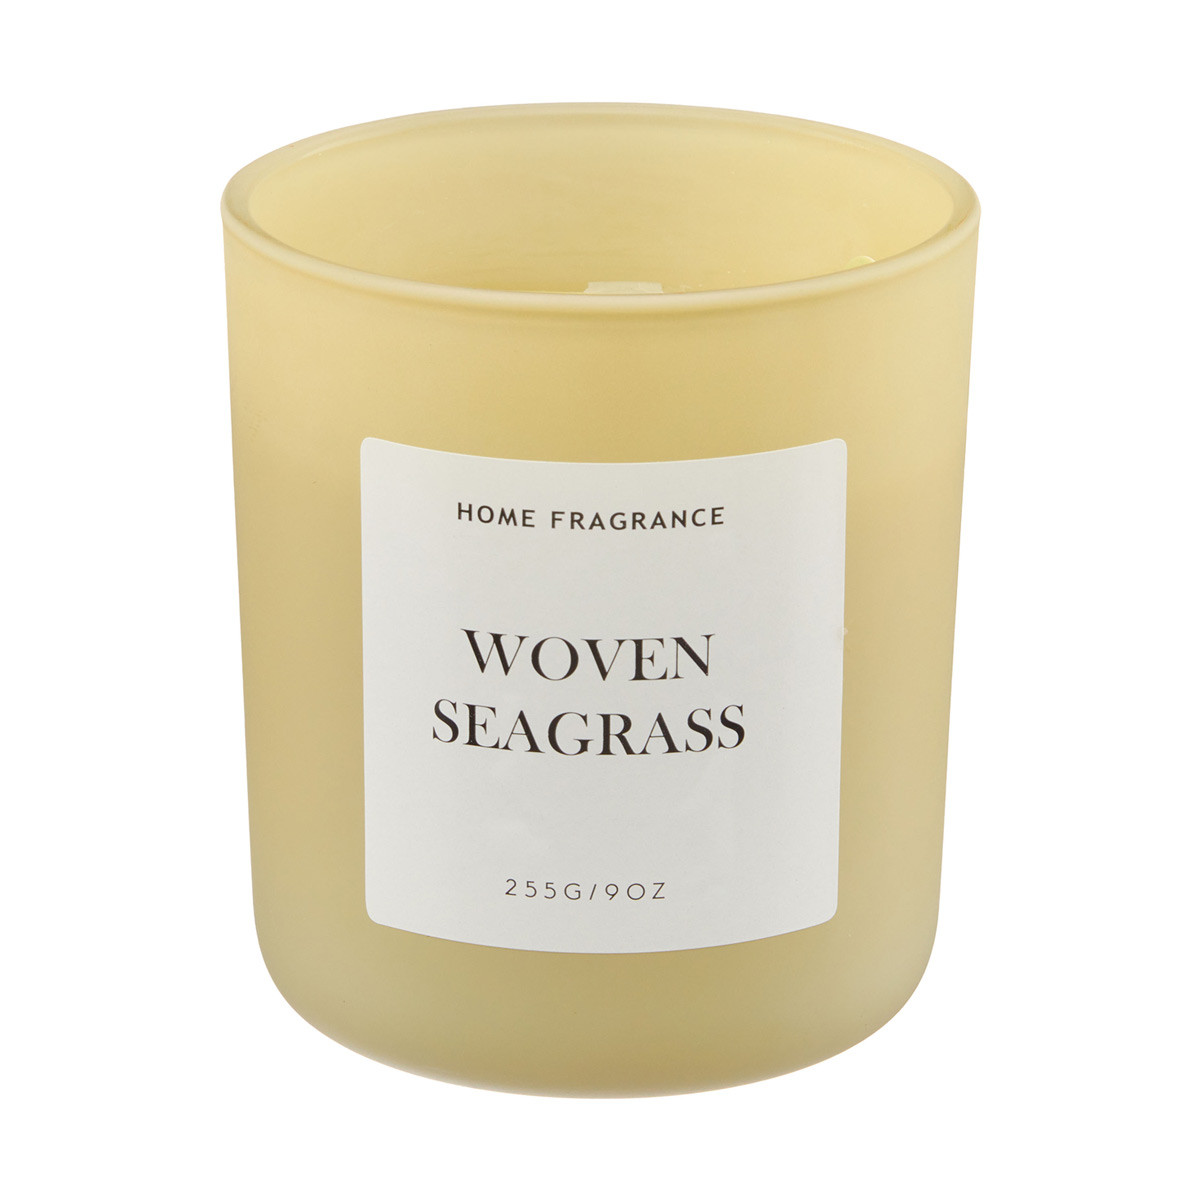 Home Fragrance Woven Seagrass Scented Candle